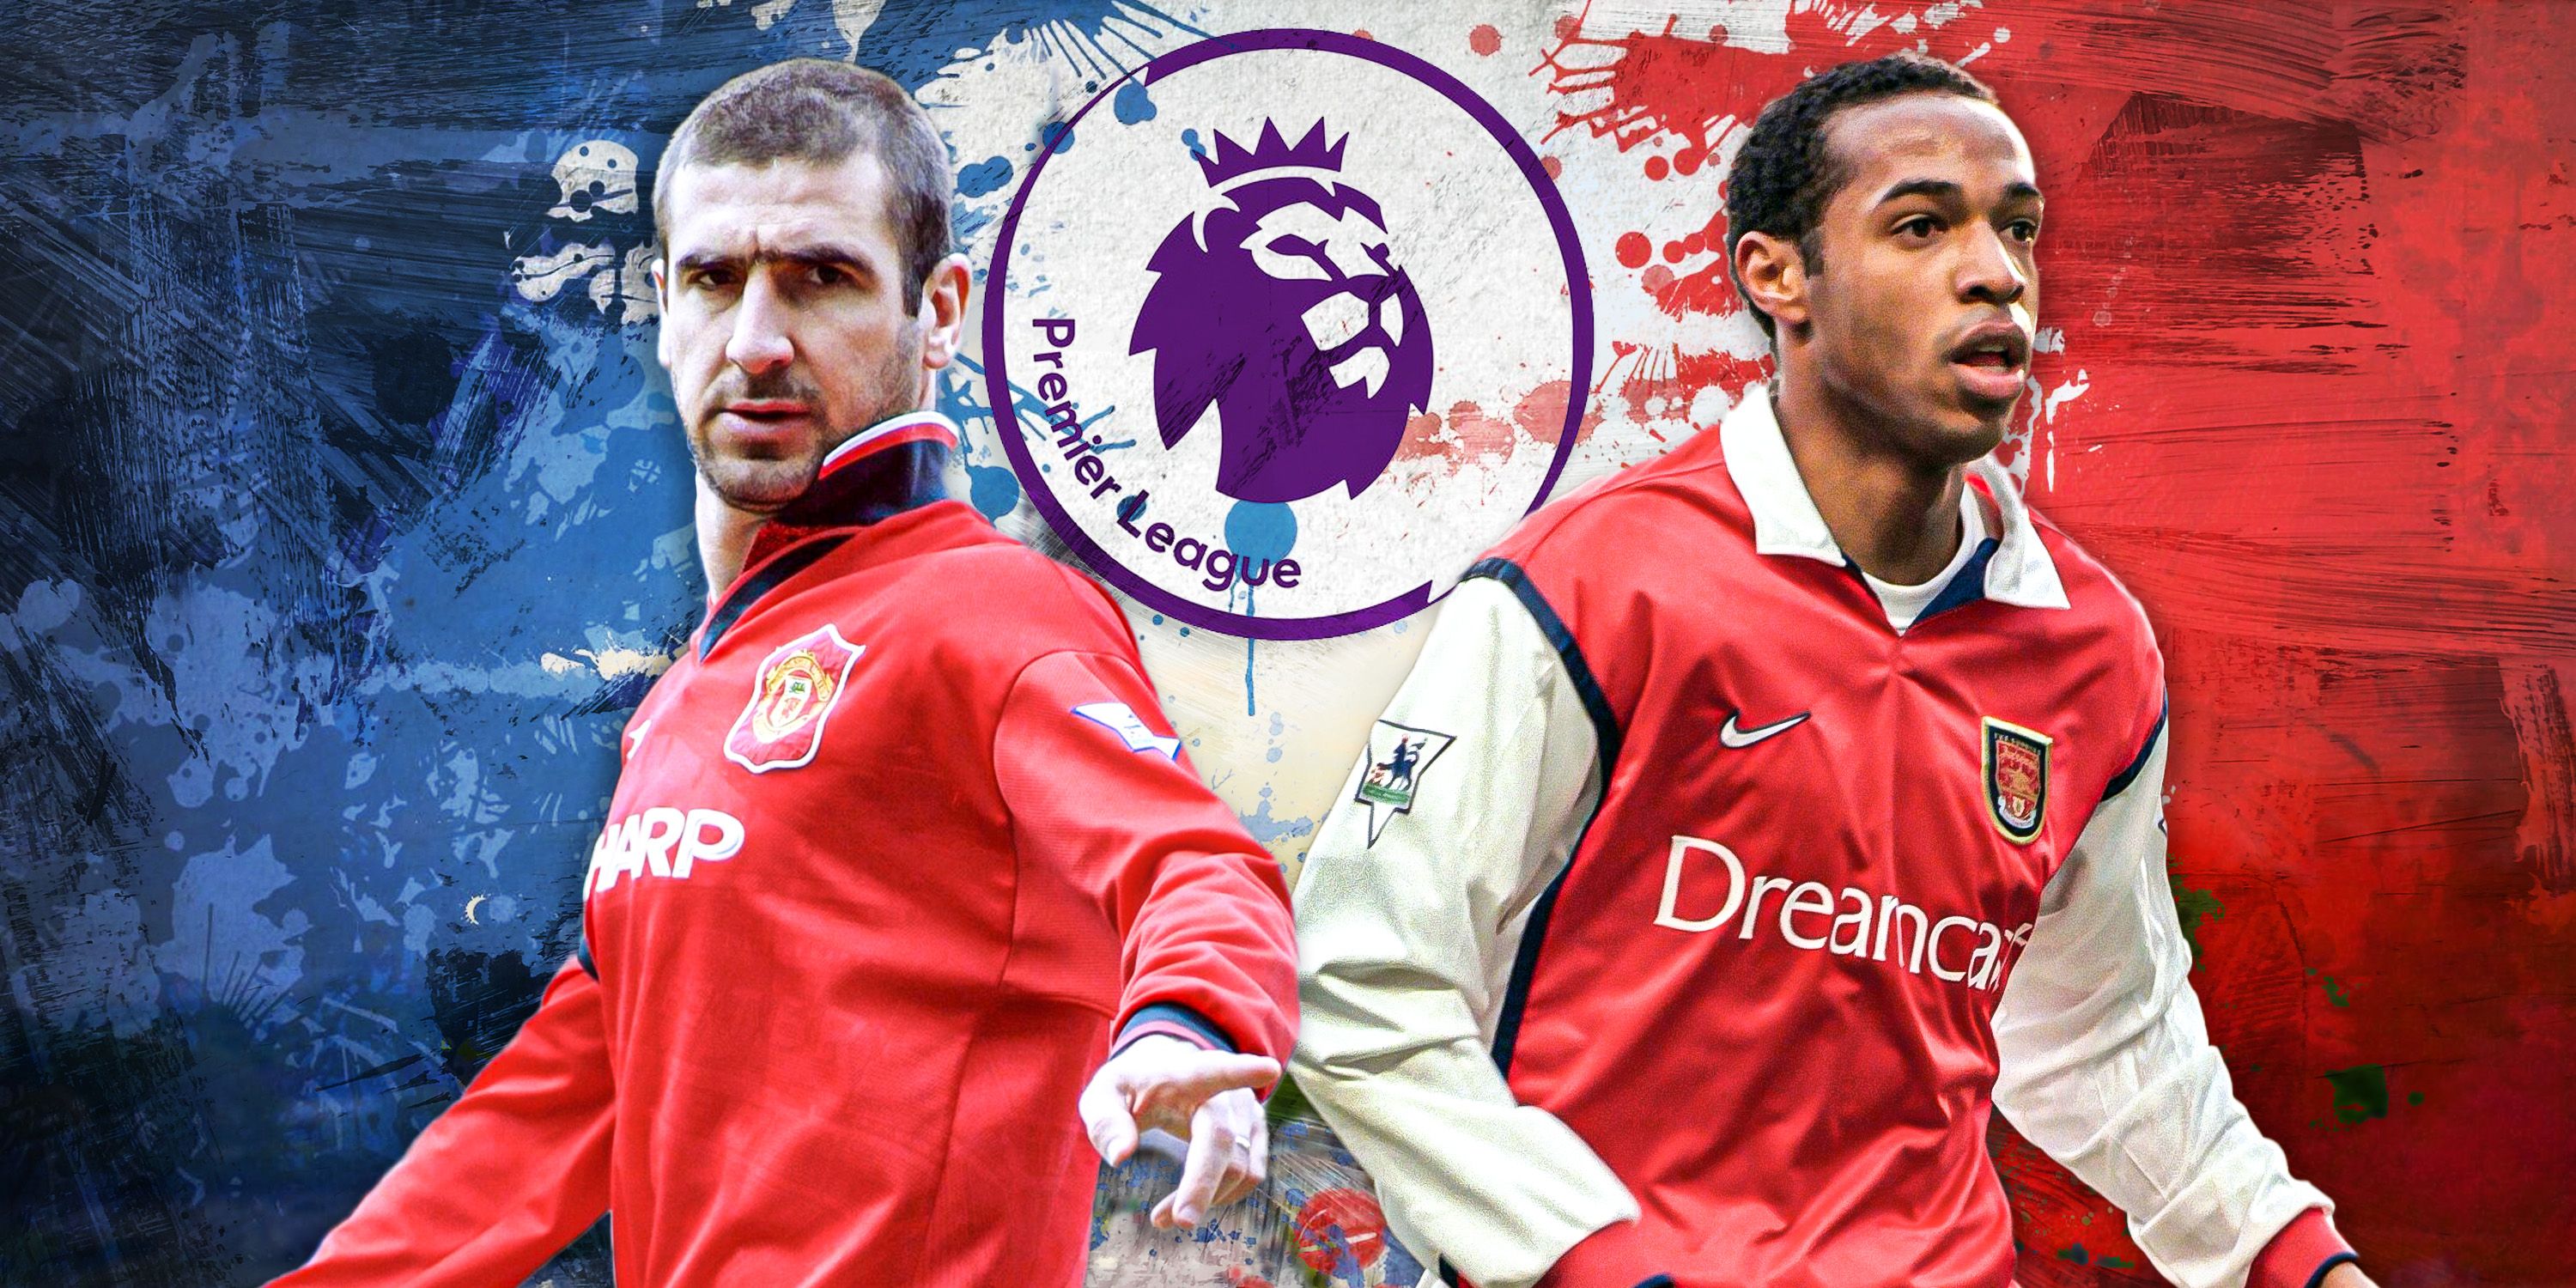 Thierry Henry (Arsenal) and Eric Cantona (Man United) with French theme but Premier League logo -